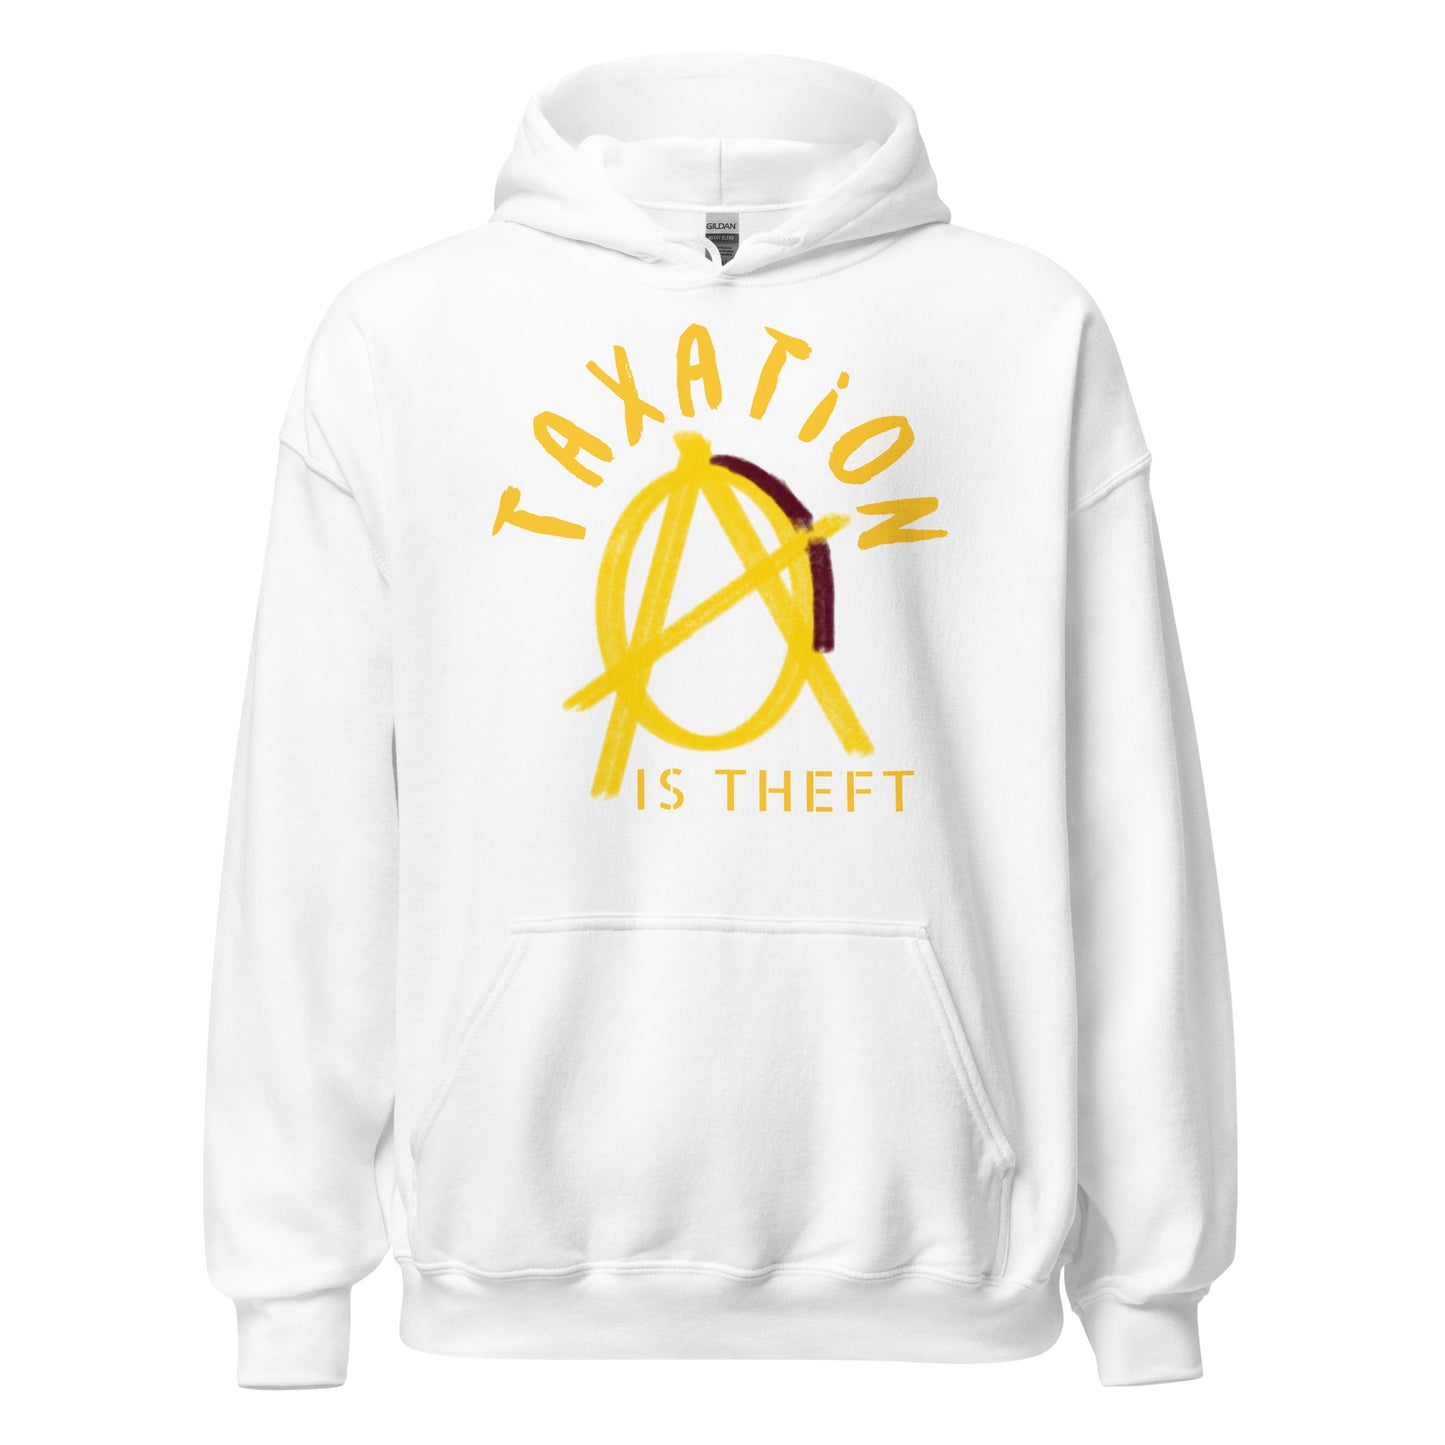 Anarchy Wear Gold "Taxation Is Theft" Hoodie